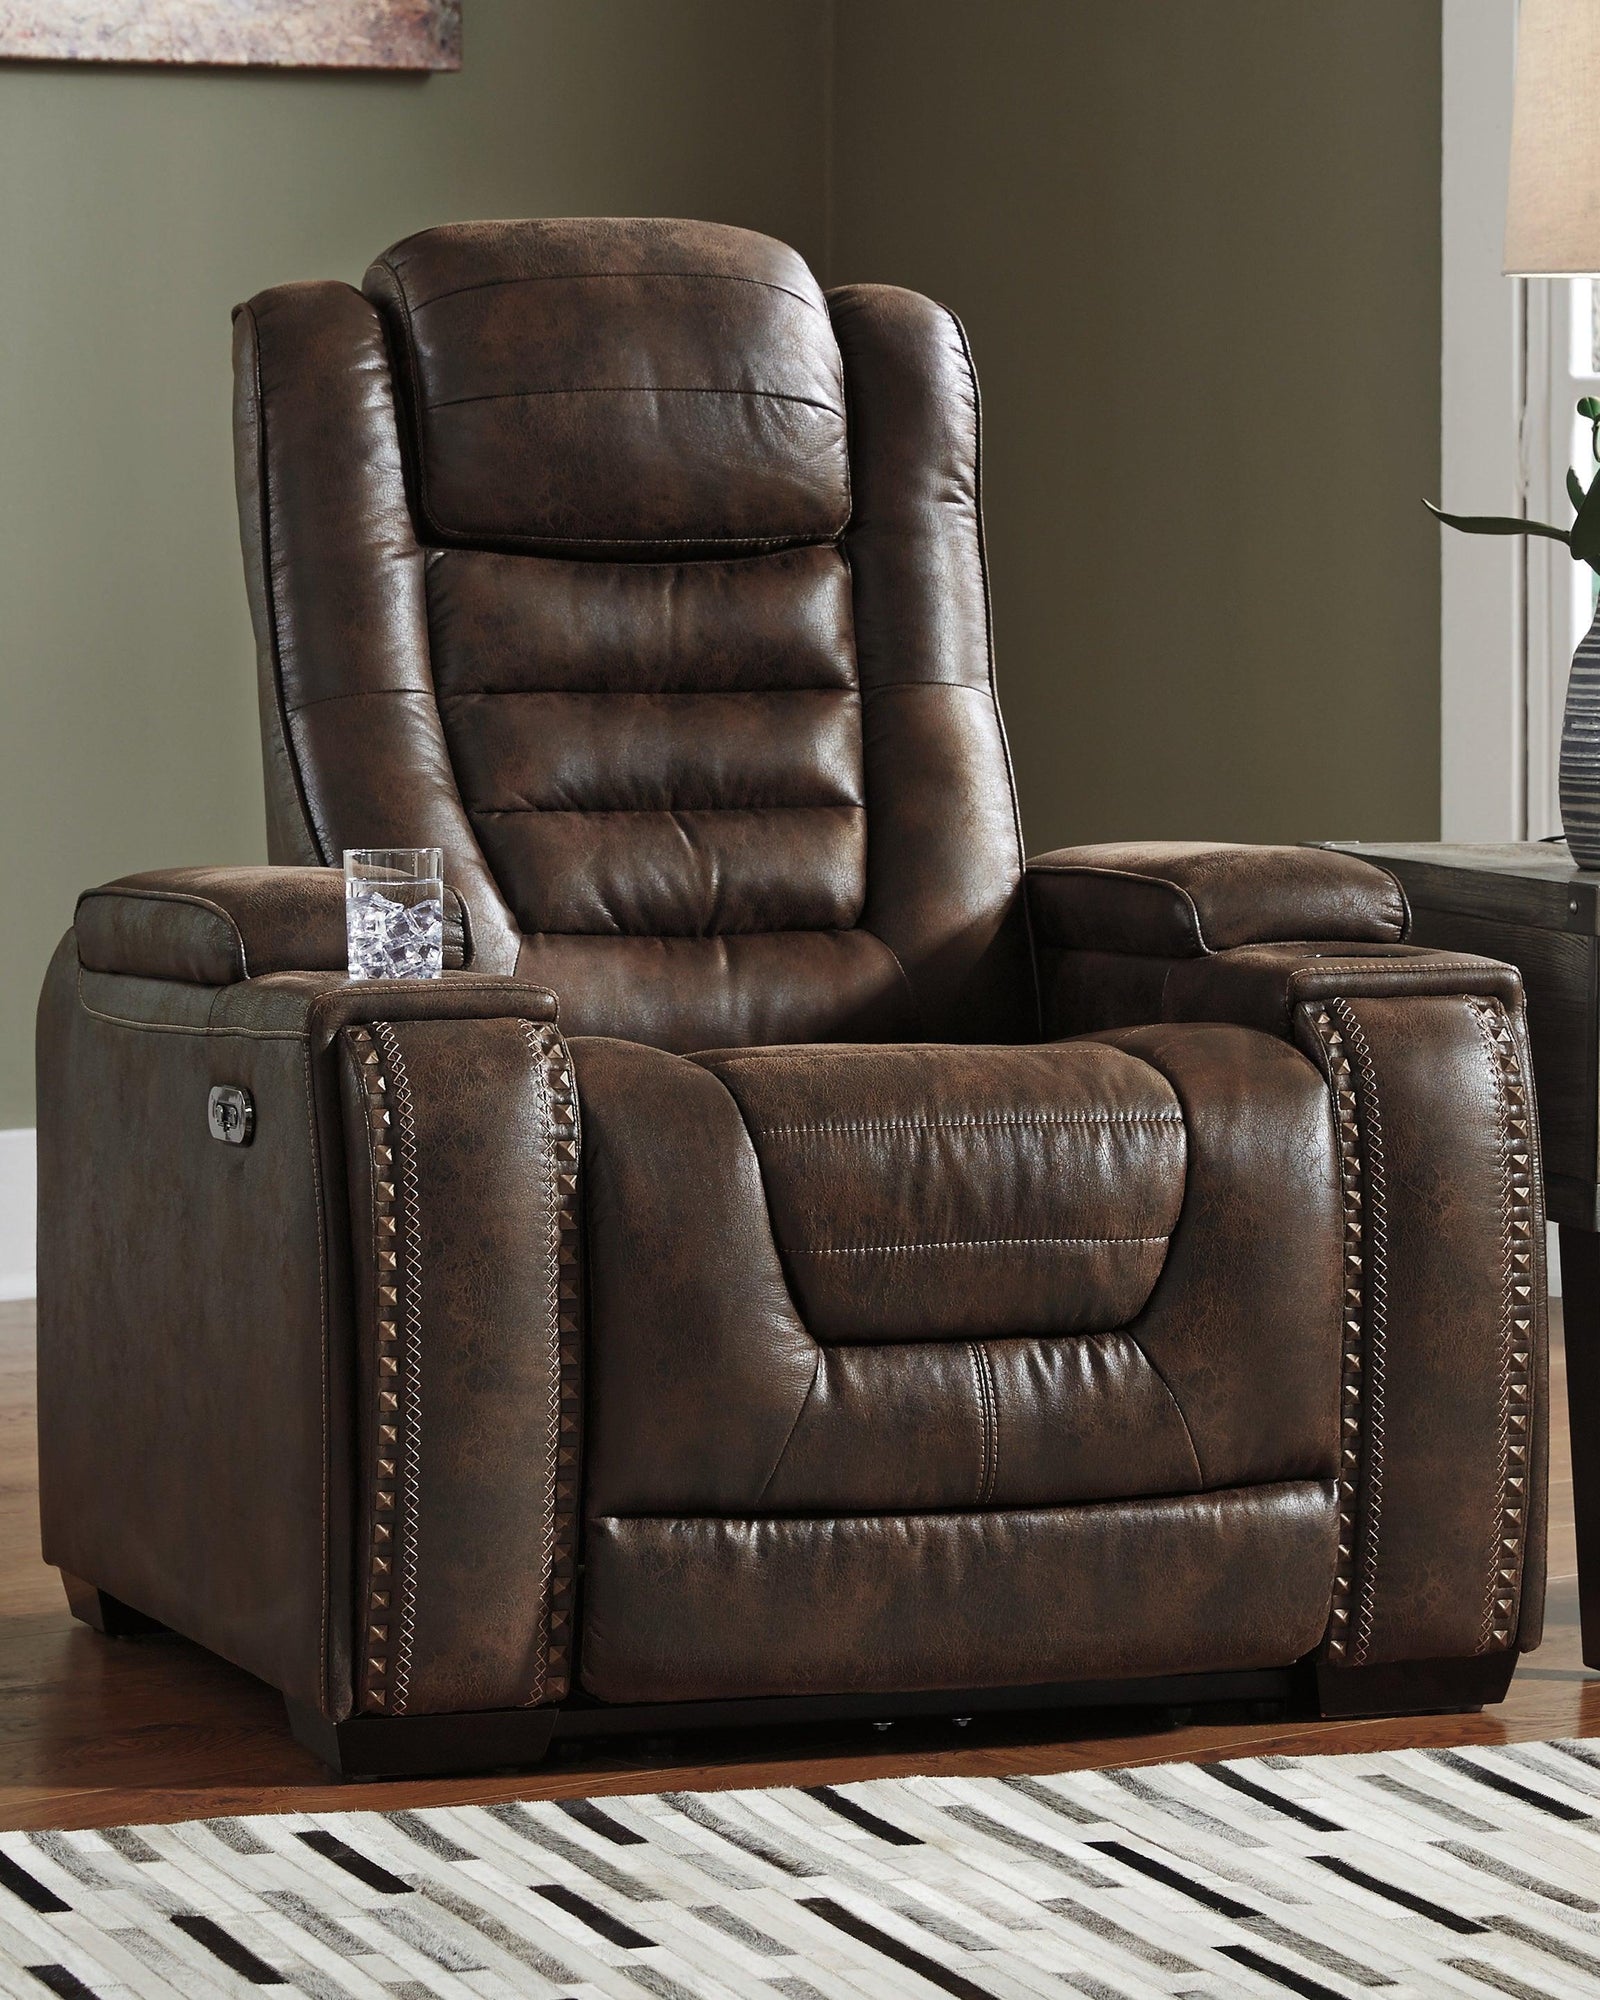 Game Zone Bark Faux Leather Power Recliner